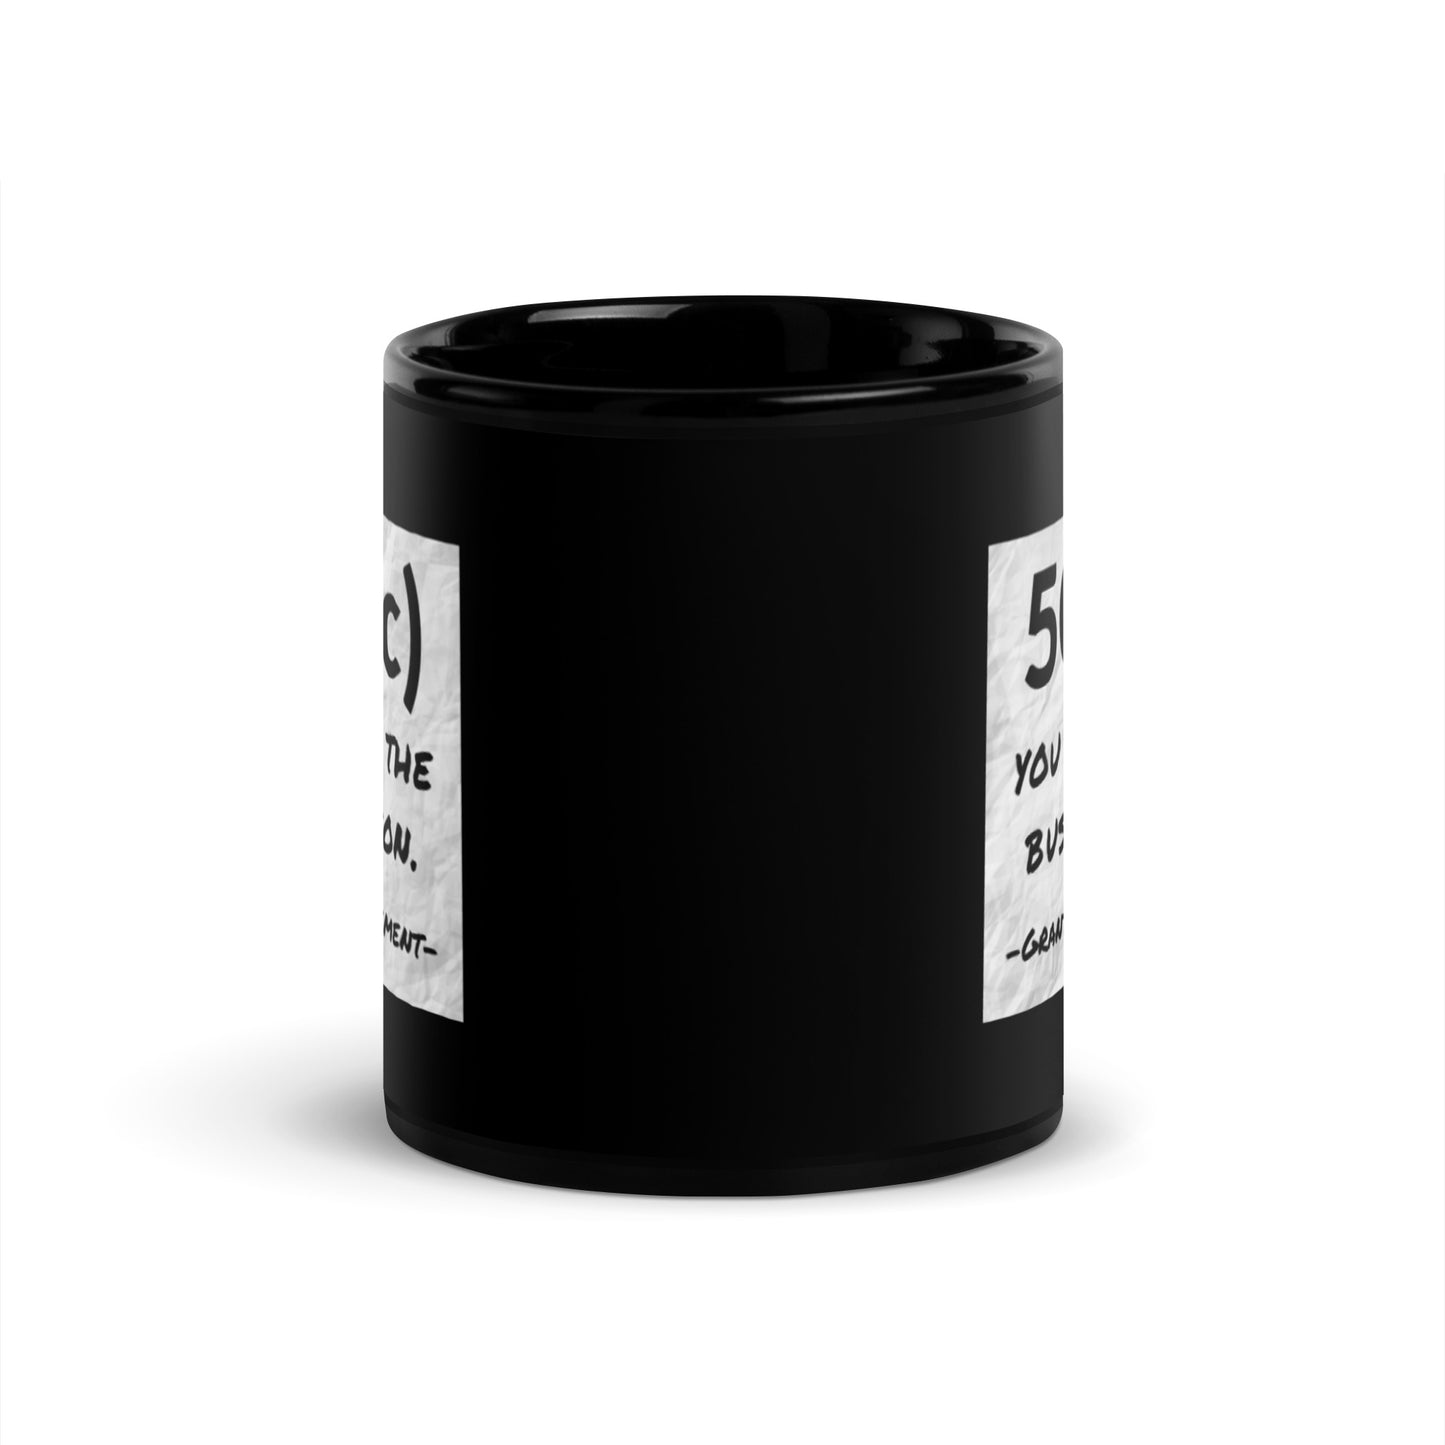 501(c) You After the Busy Season Grants Management Black Glossy Mug 11oz-recalciGrant